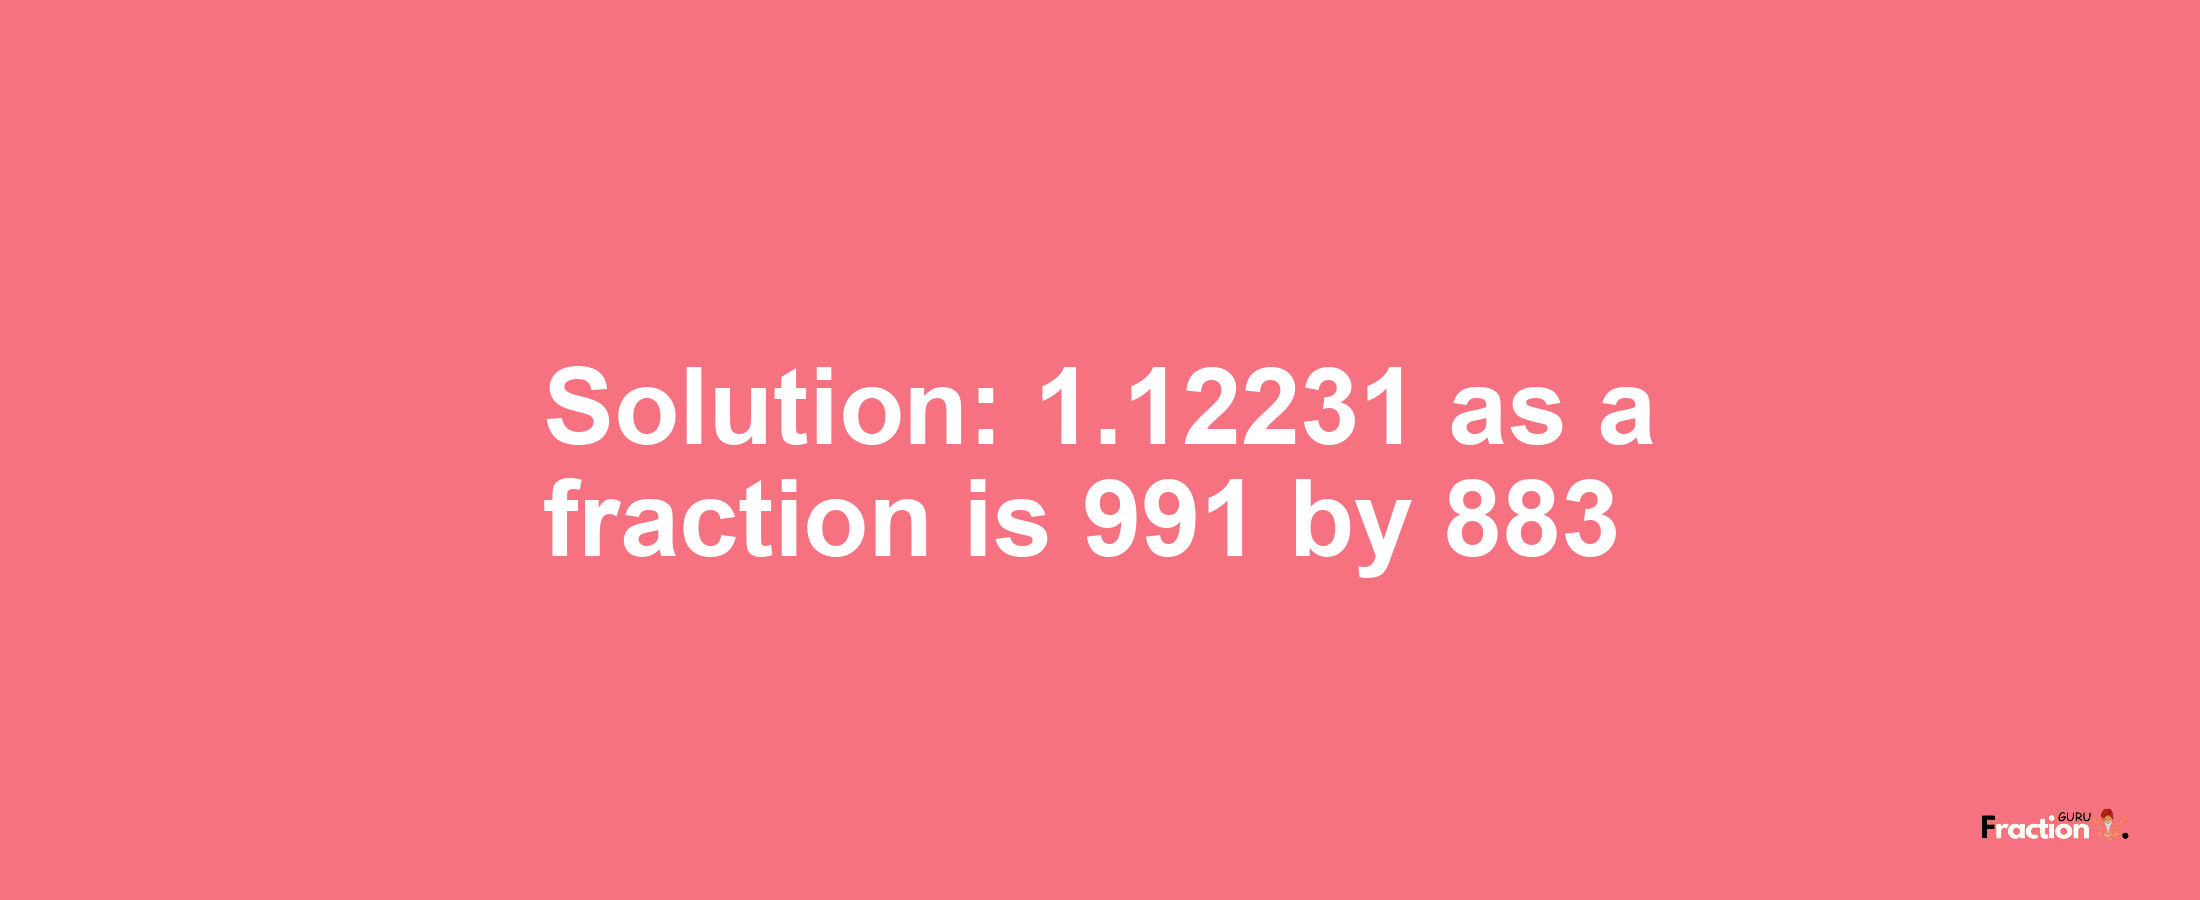 Solution:1.12231 as a fraction is 991/883